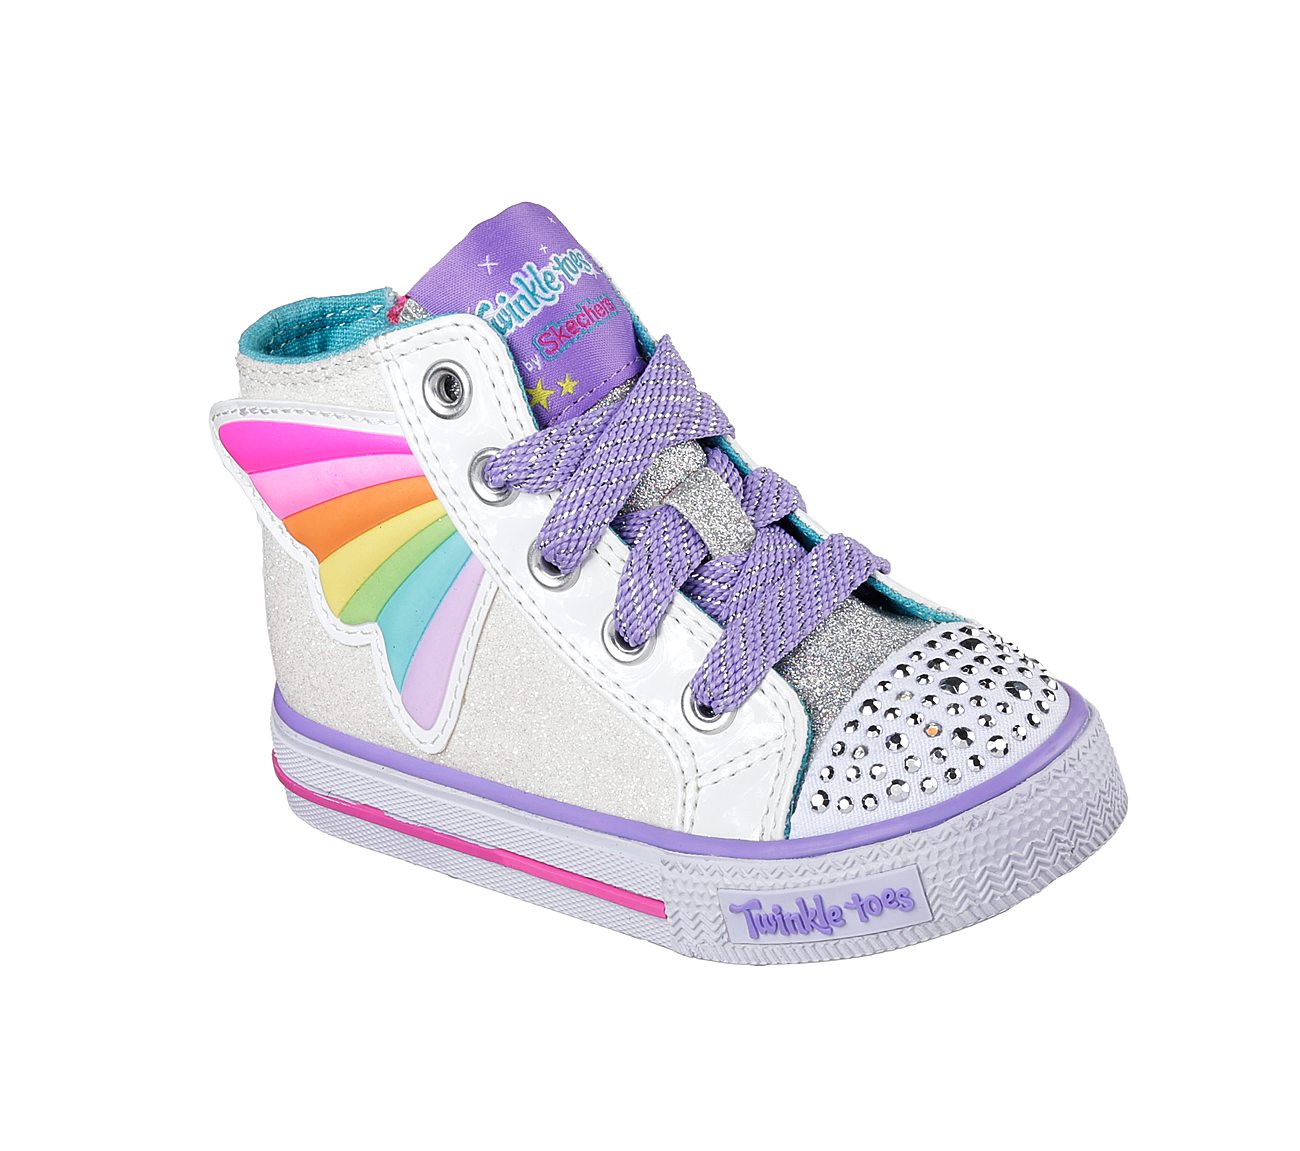 skechers twinkle toes brite wing light up shoes